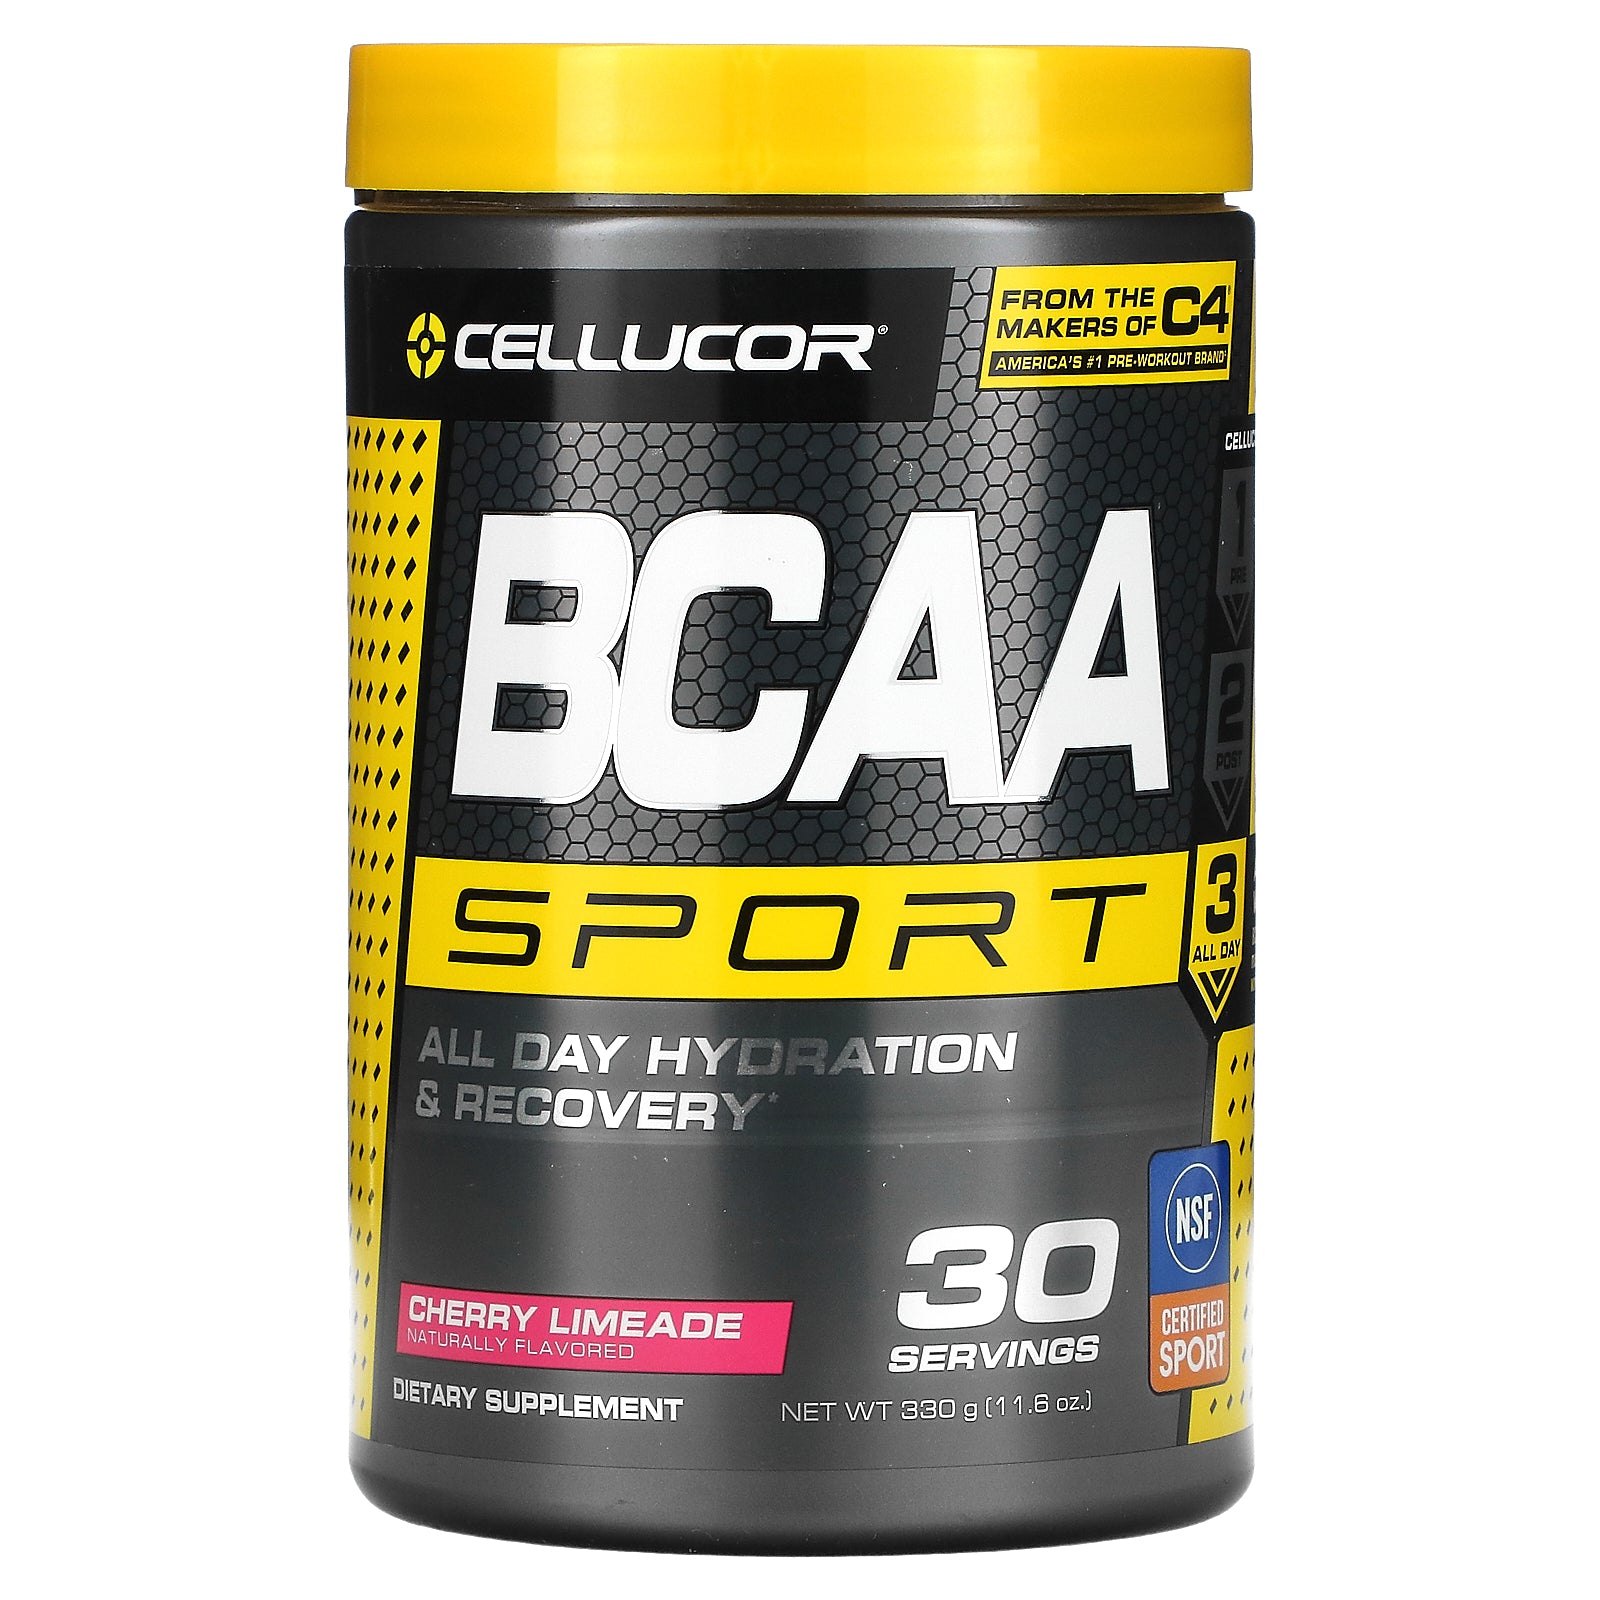 Cellucor, BCAA Sport, All Day Hydration & Recovery, Cherry Limeade